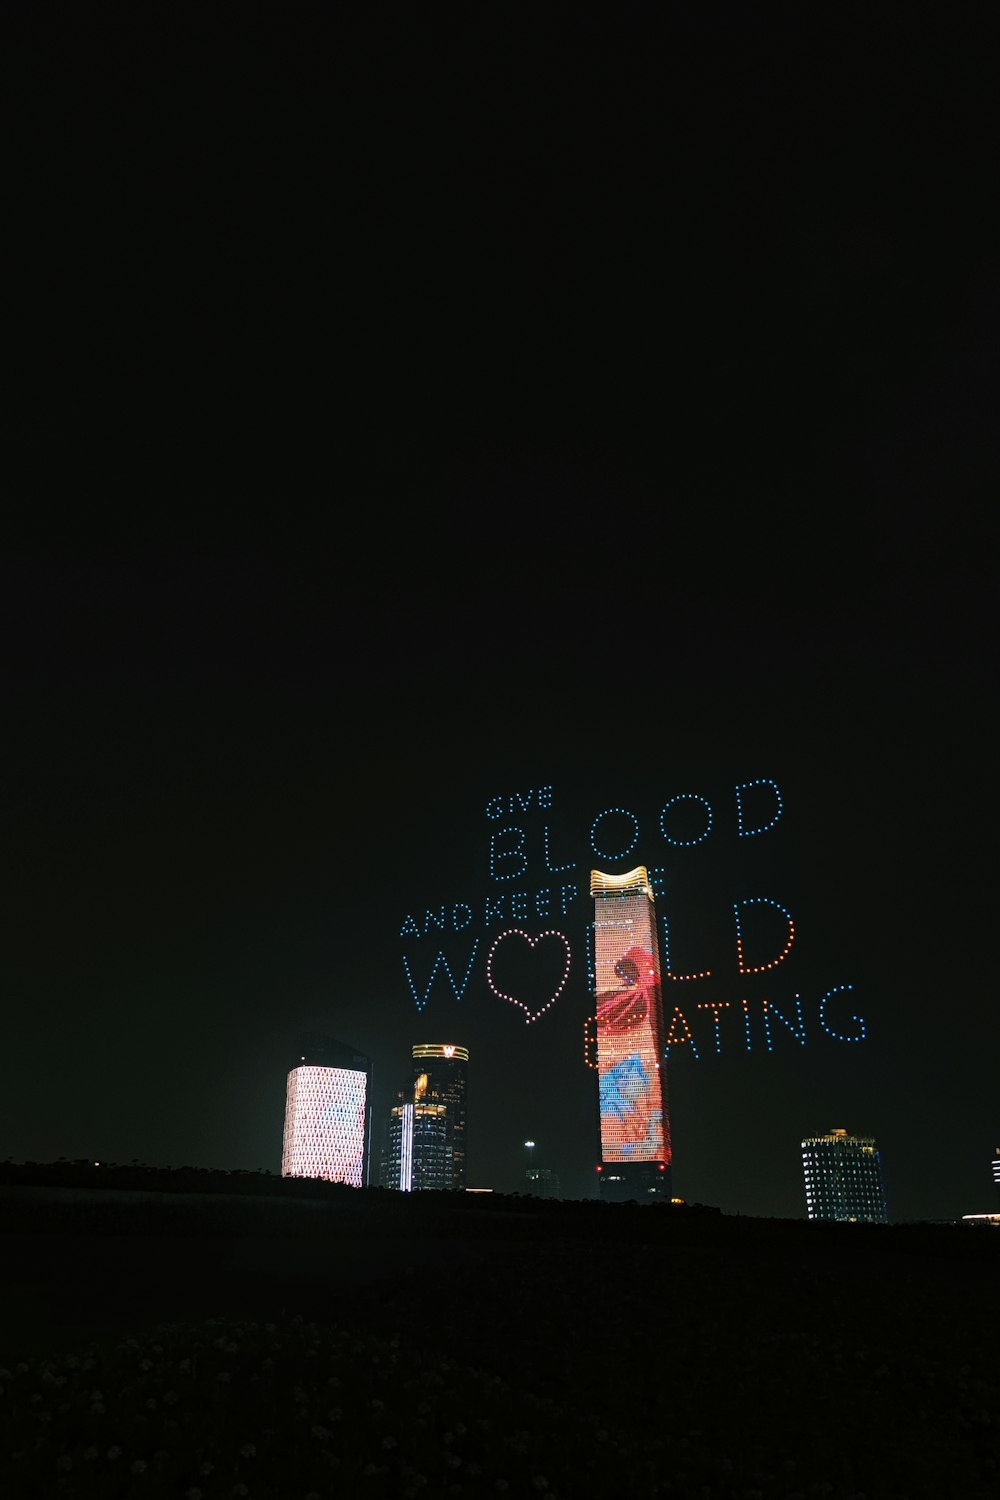 a city skyline at night with a message projected in the sky